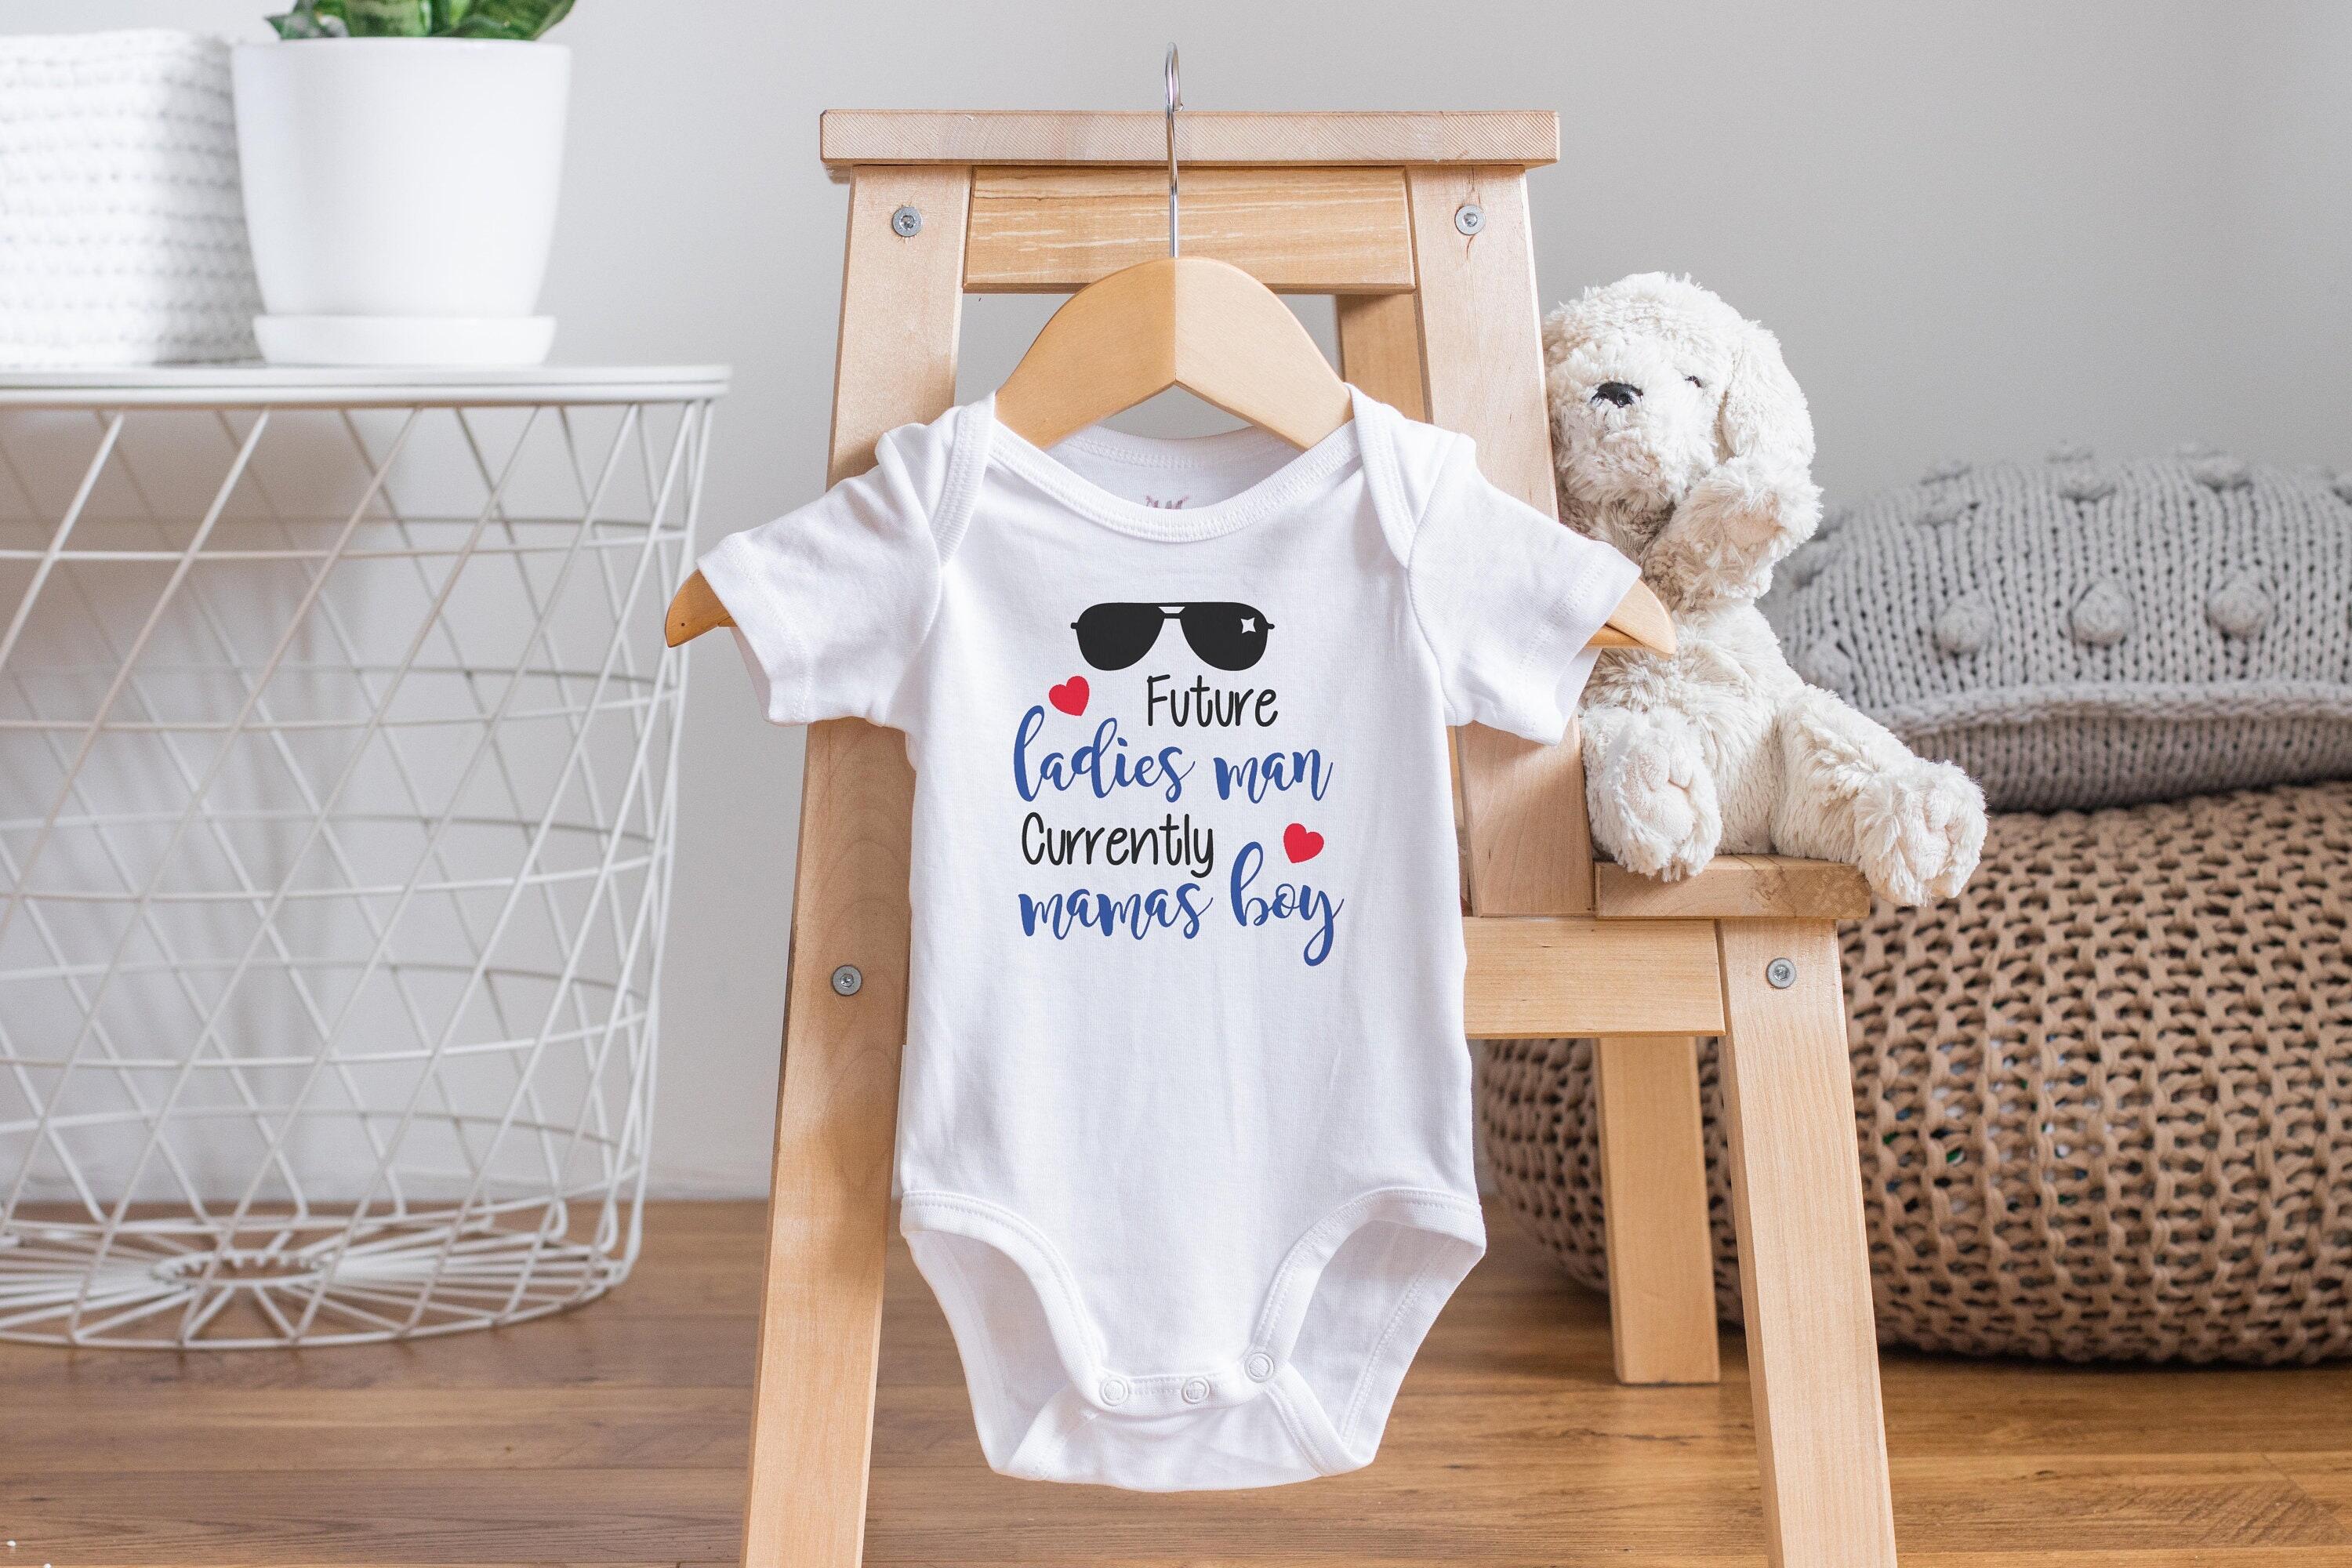 Baby Shower Onesie Boy Thank You Tags Blue Onsie With 